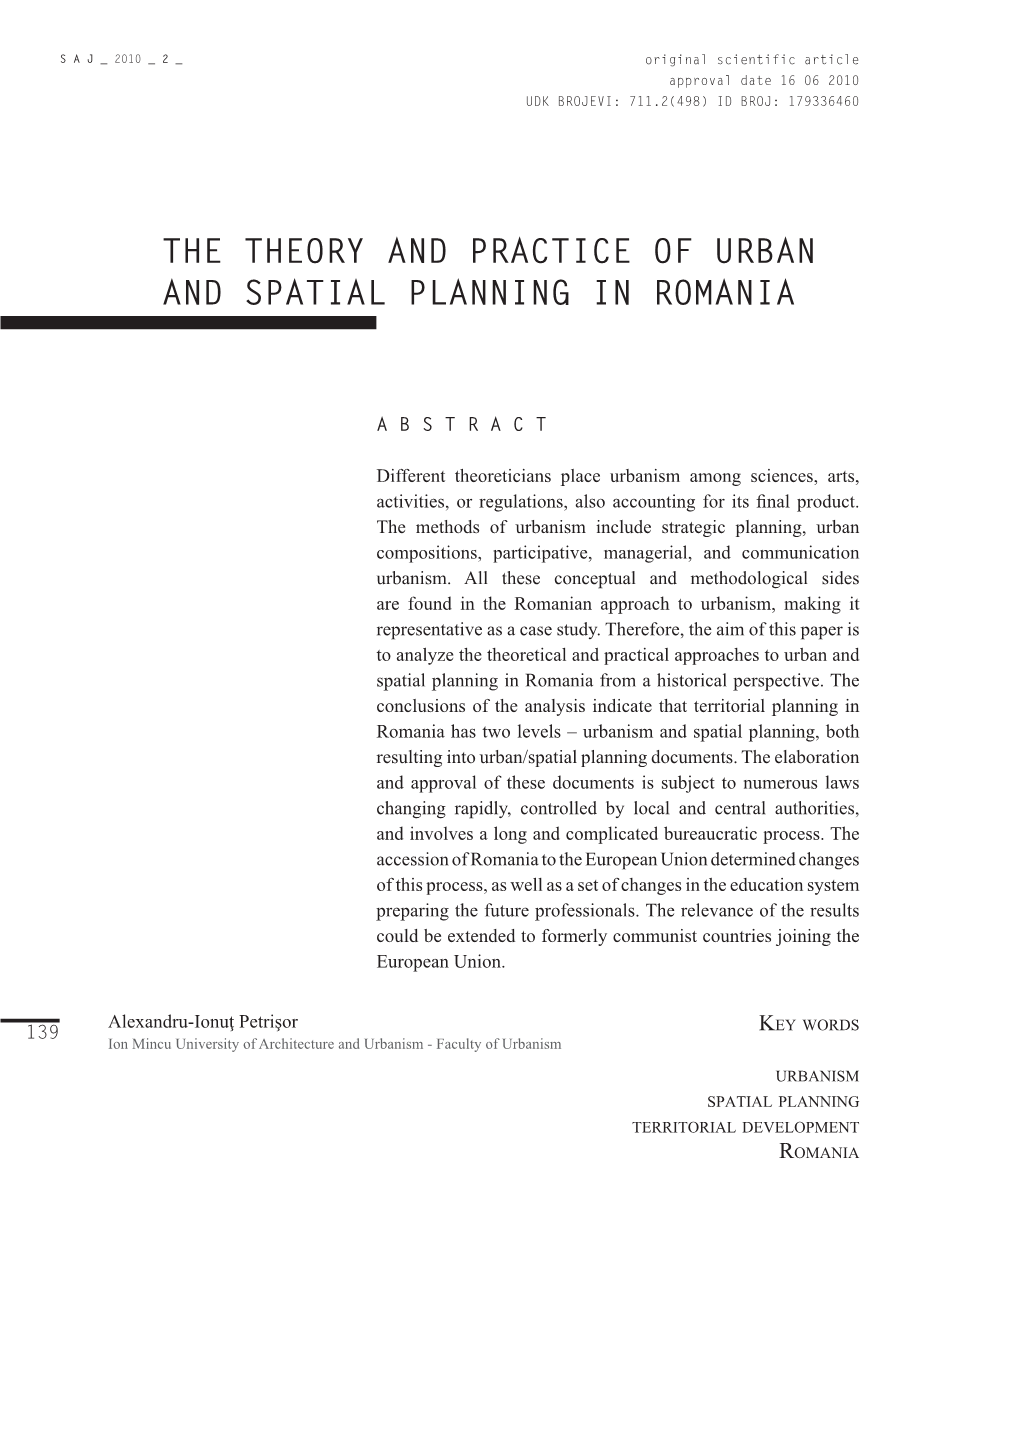 The Theory and Practice of Urban and Spatial Planning in Romania